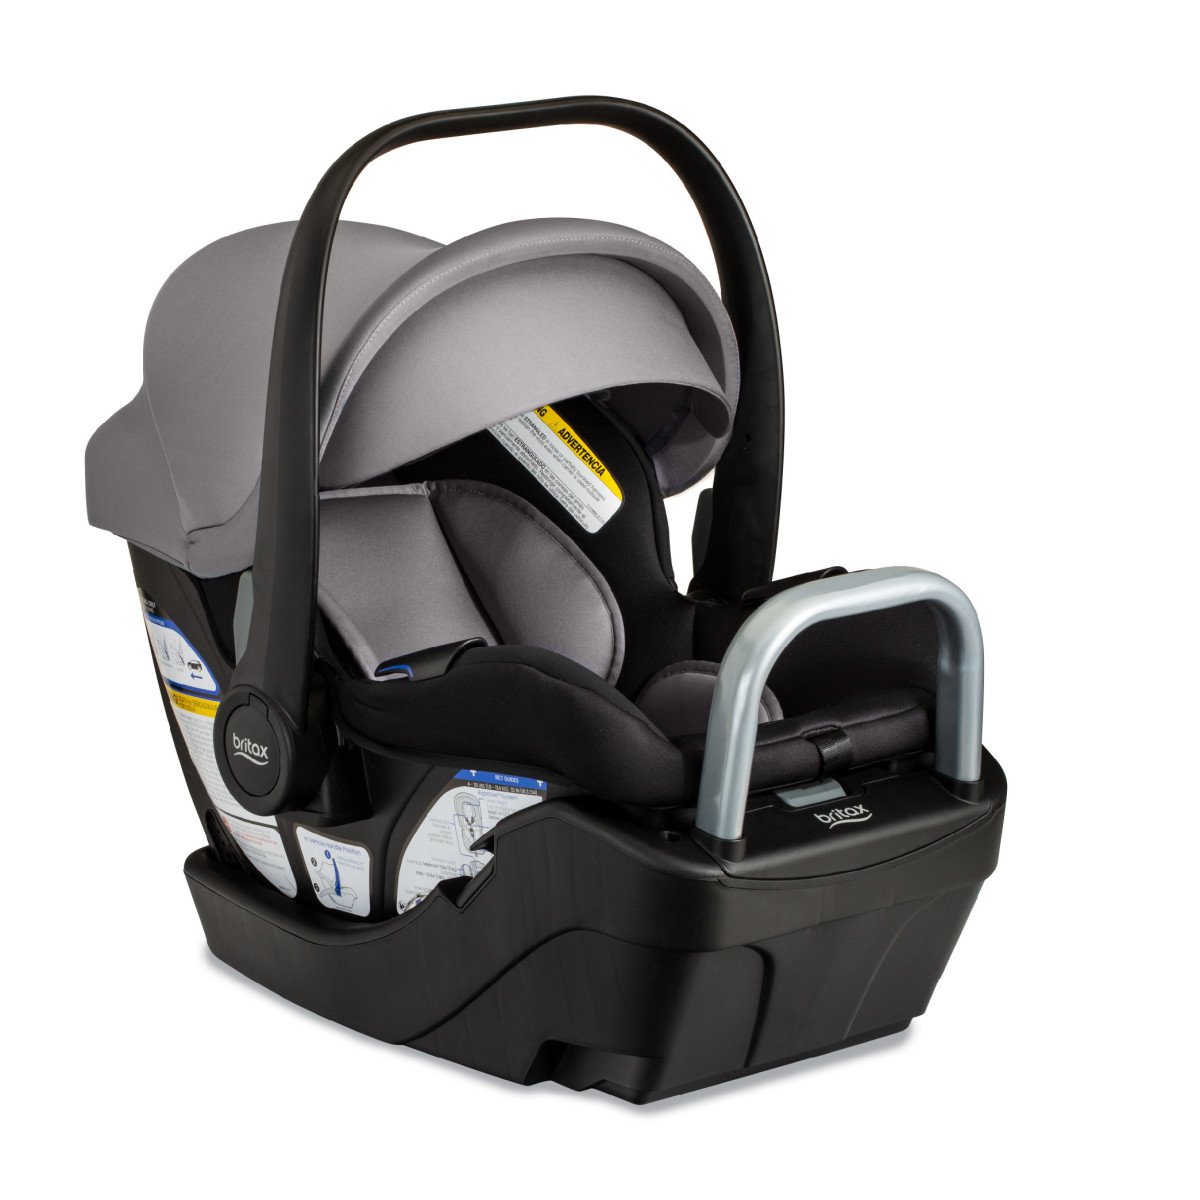 Graphite Onyx Willow S Infant Car Seat Right Facing (Copy)